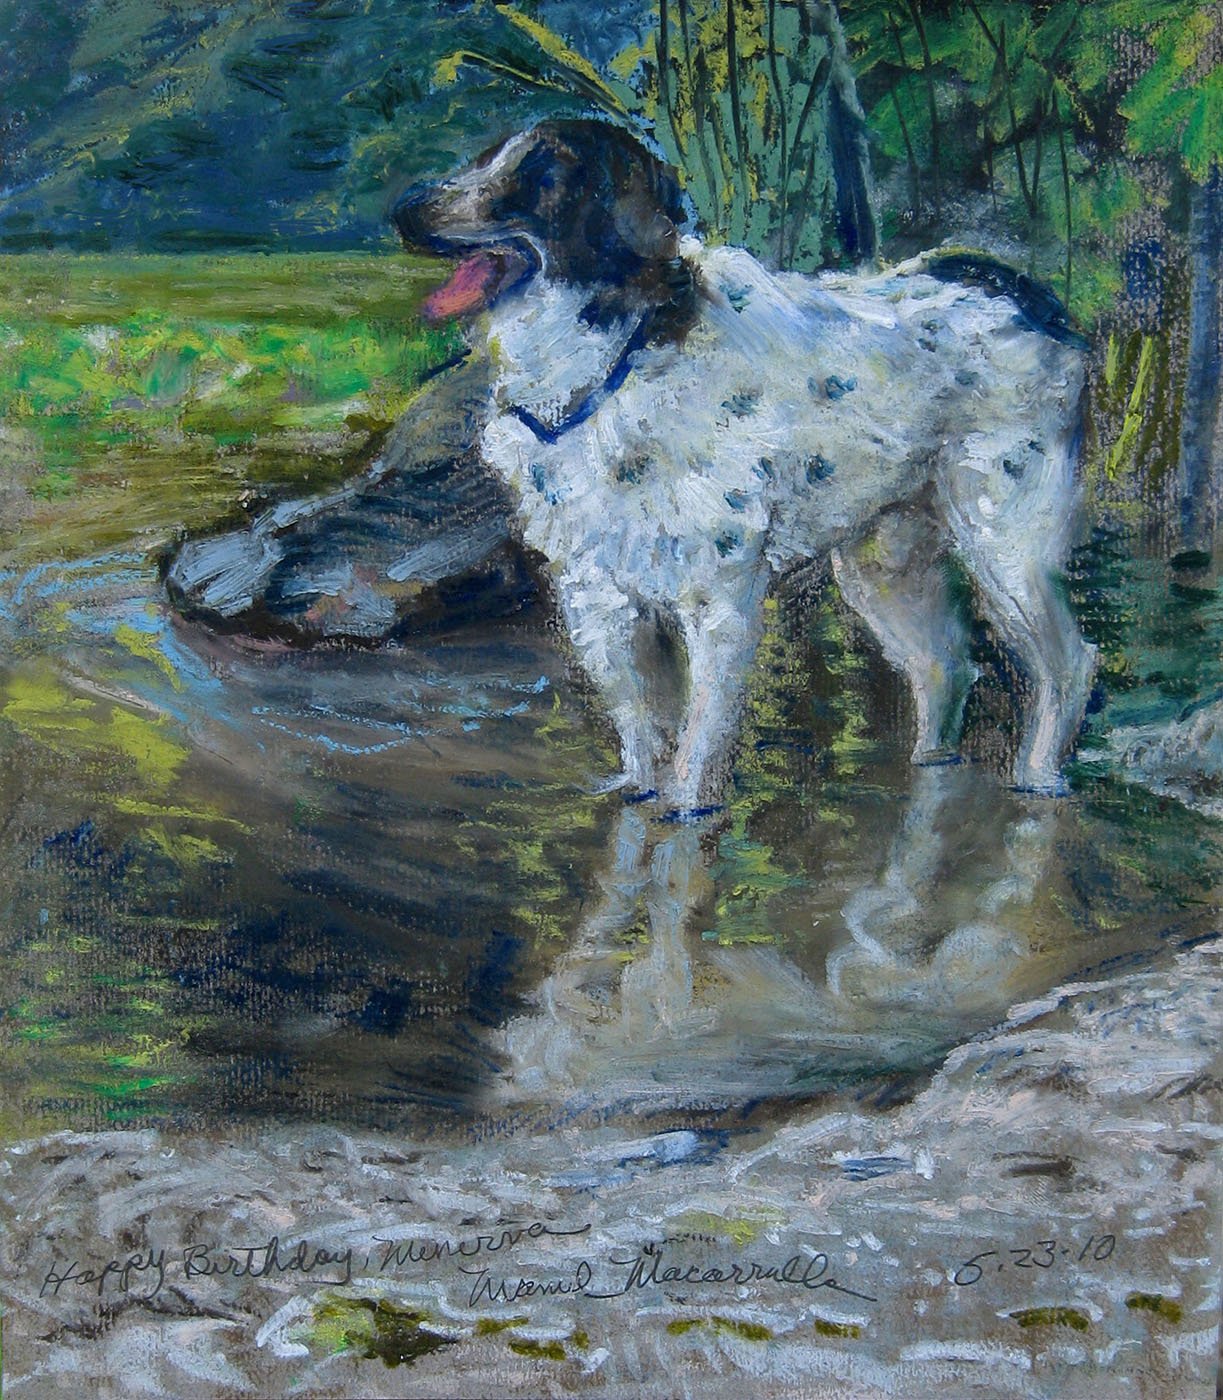    Dog In the Water,  2010. Oil pastel. 12” X 9”. (Private collection.)  